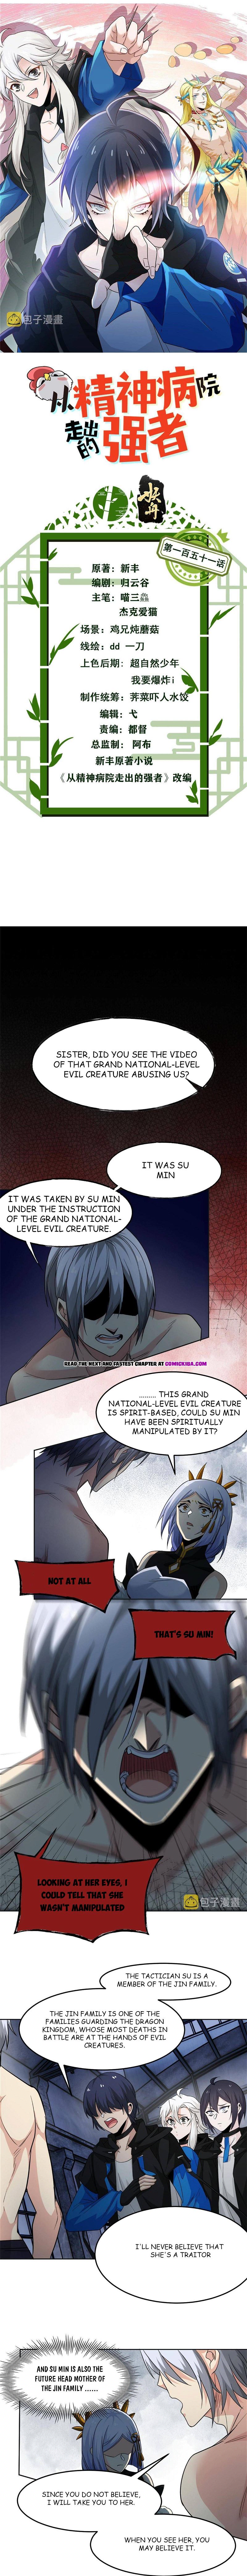 The Strong Man From The Mental Hospital Chapter 151 page 1